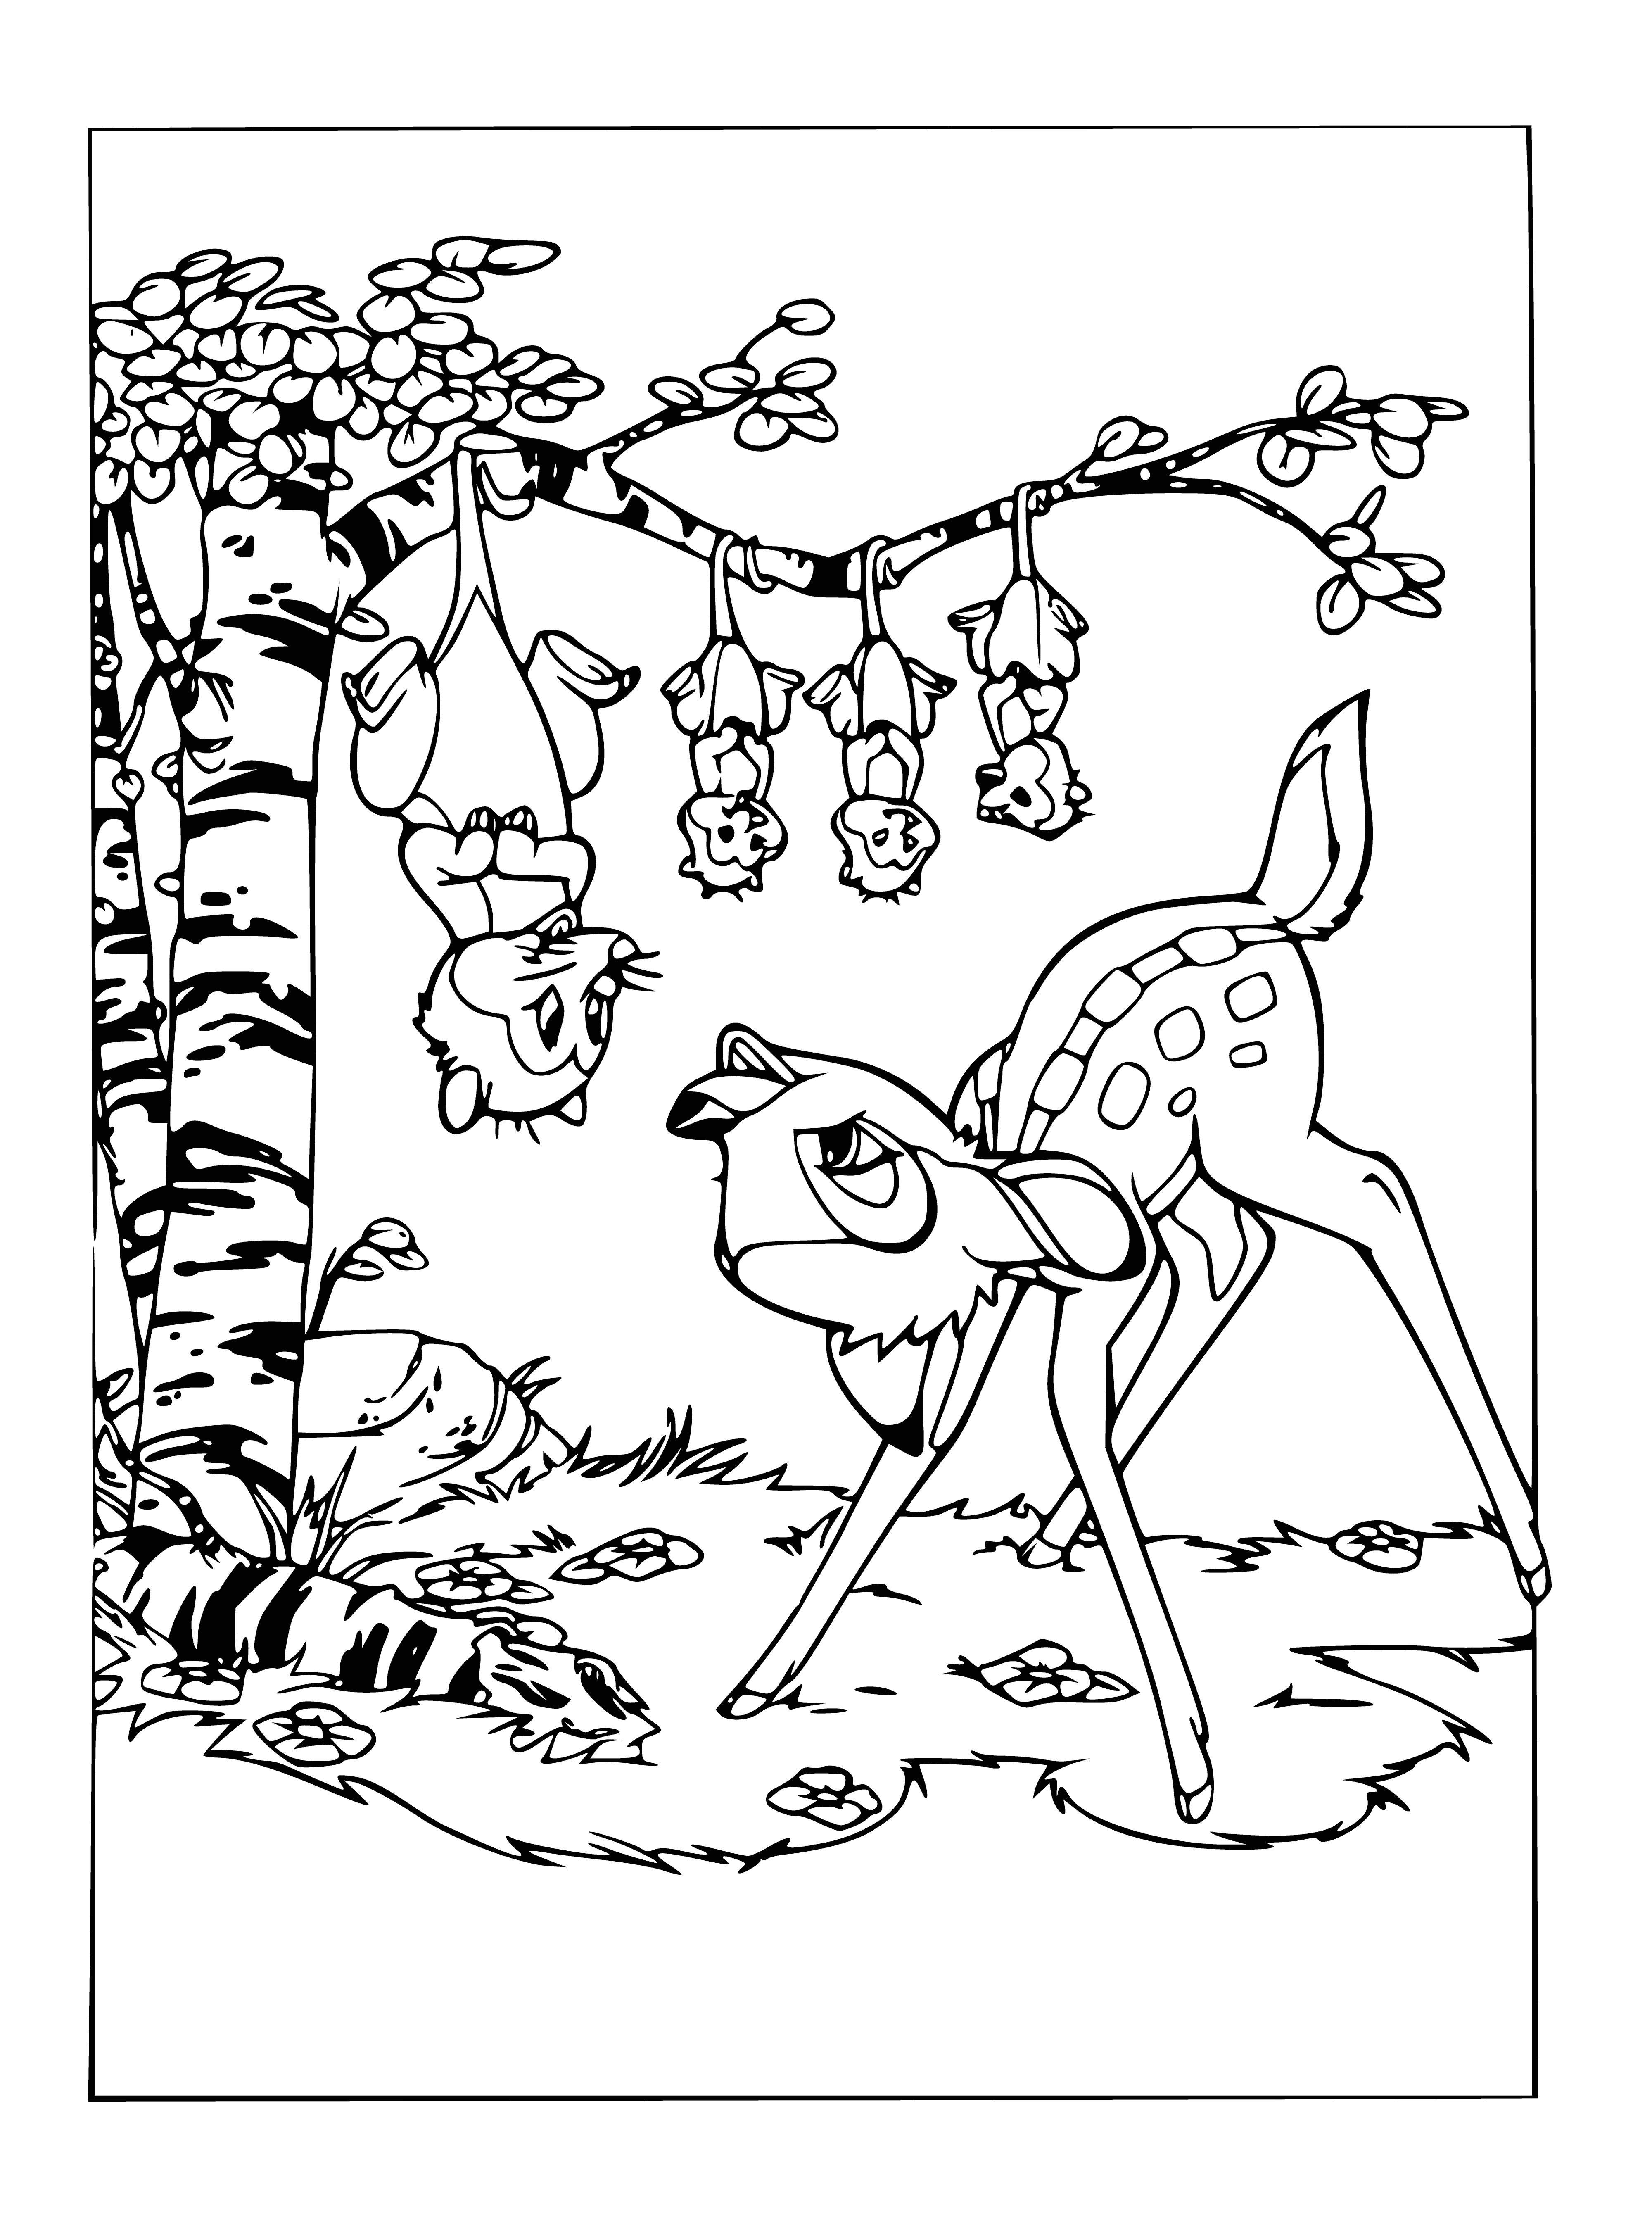 coloring page: 2 animals coloring page: possum hanging from tree branch & Bambi standing next to tree. (Brown & white)